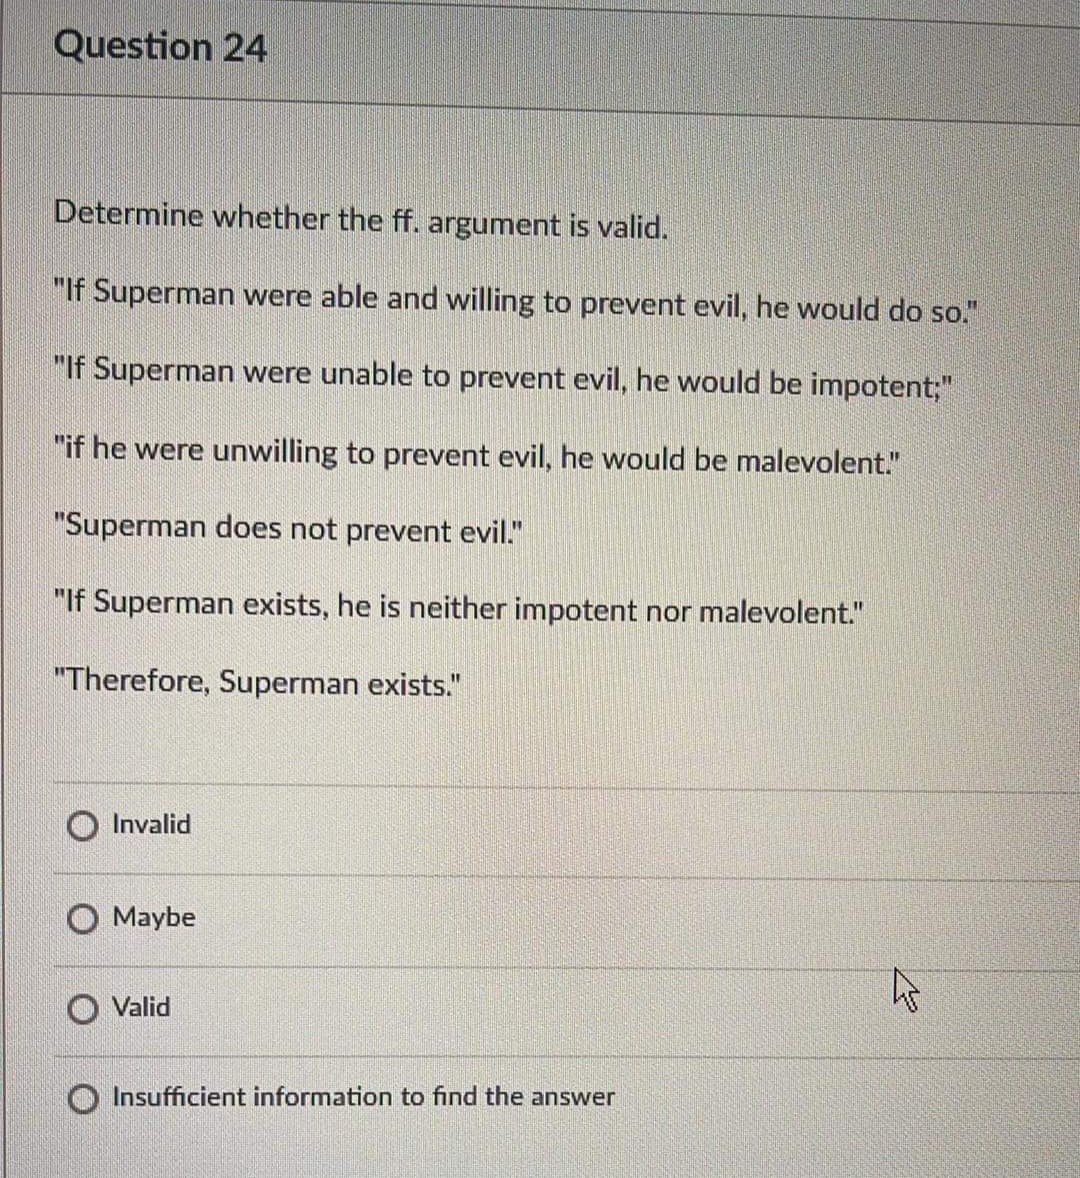 Question 24
Determine whether the ff. argument is valid.
"If Superman were able and willing to prevent evil, he would do so."
"If Superman were unable to prevent evil, he would be impotent;"
"if he were unwilling to prevent evil, he would be malevolent."
"Superman does not prevent evil."
"If Superman exists, he is neither impotent nor malevolent."
"Therefore, Superman exists."
Invalid
Maybe
Valid
Insufficient information to find the answer
